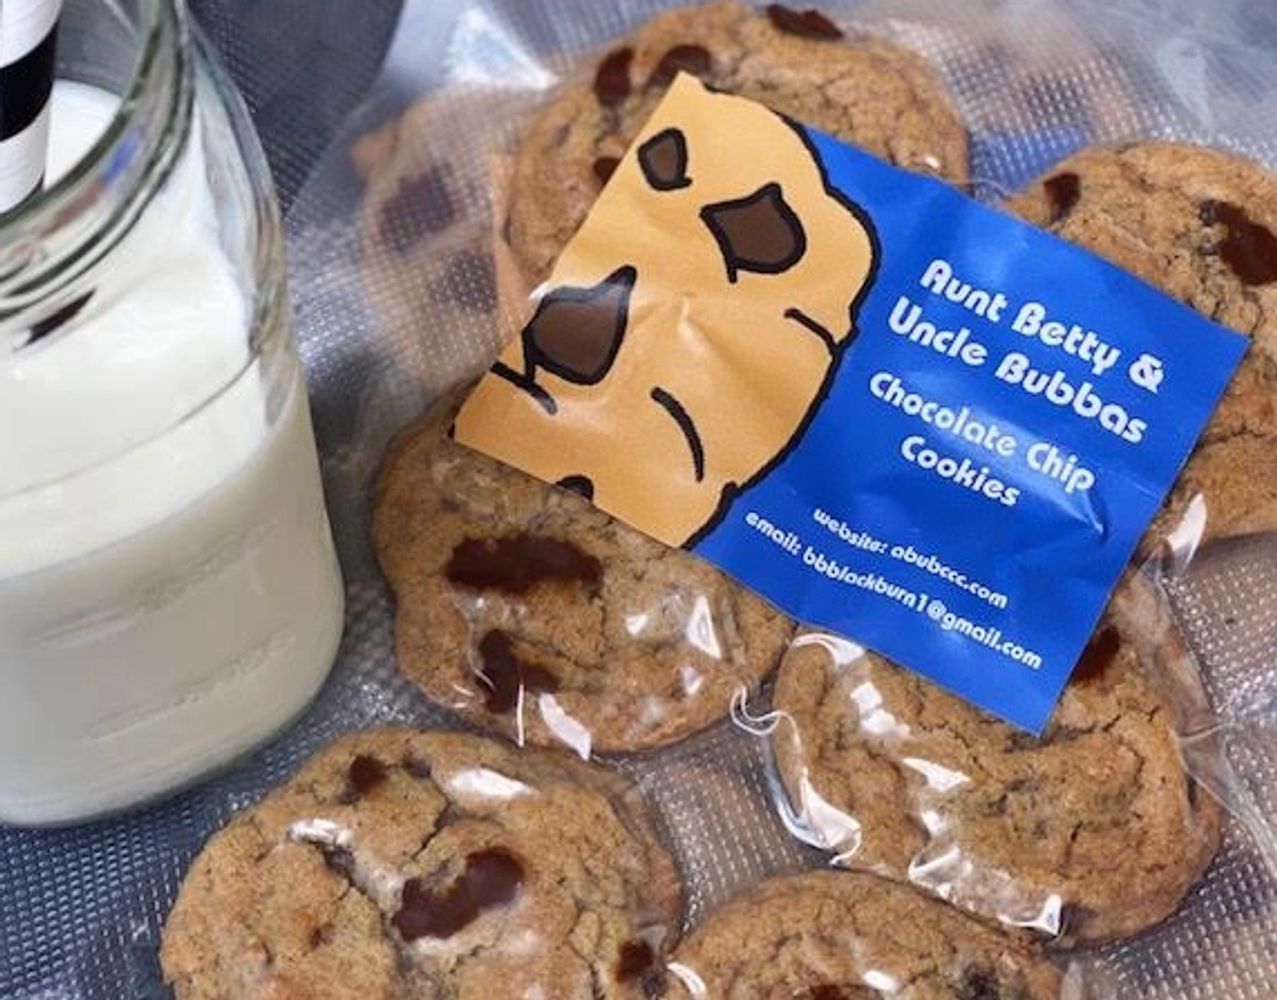 Aunt Betty & Uncle Bubba's Chocolate Chip Cookies - Homemade Chocolate Chip  Cookies - Arlington, Virginia